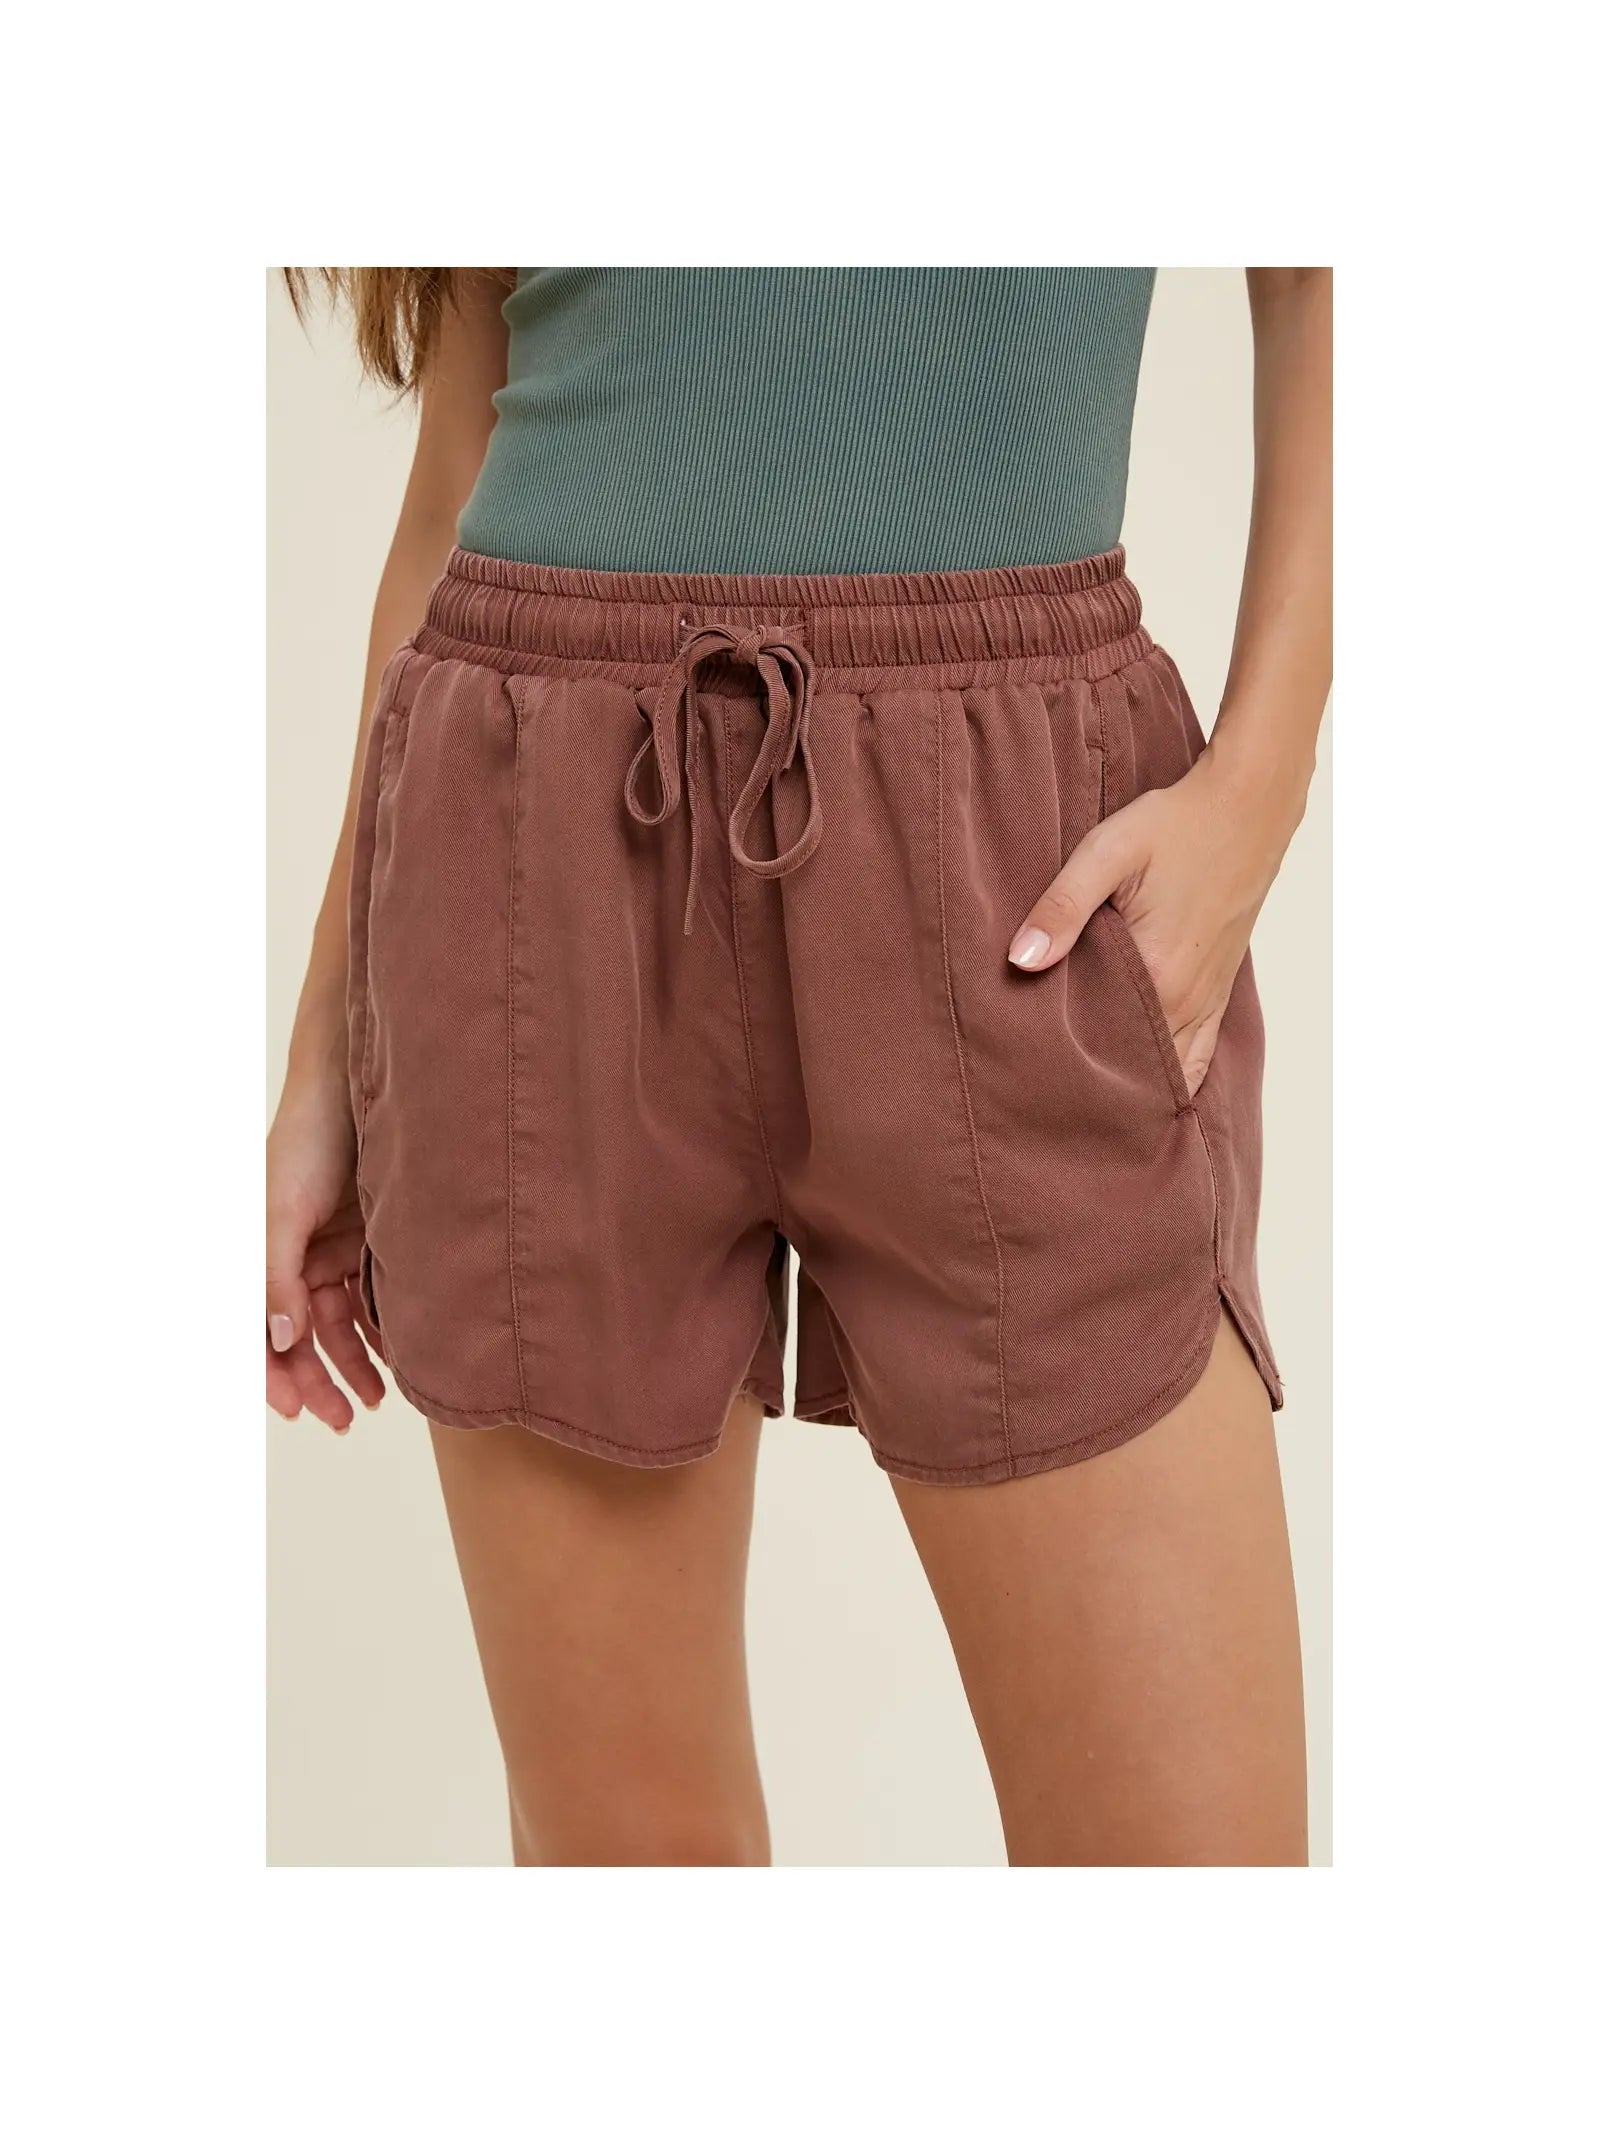 Front view of light weight, flowy shorts with a drawstring, elastic waistband and dolphin hem 